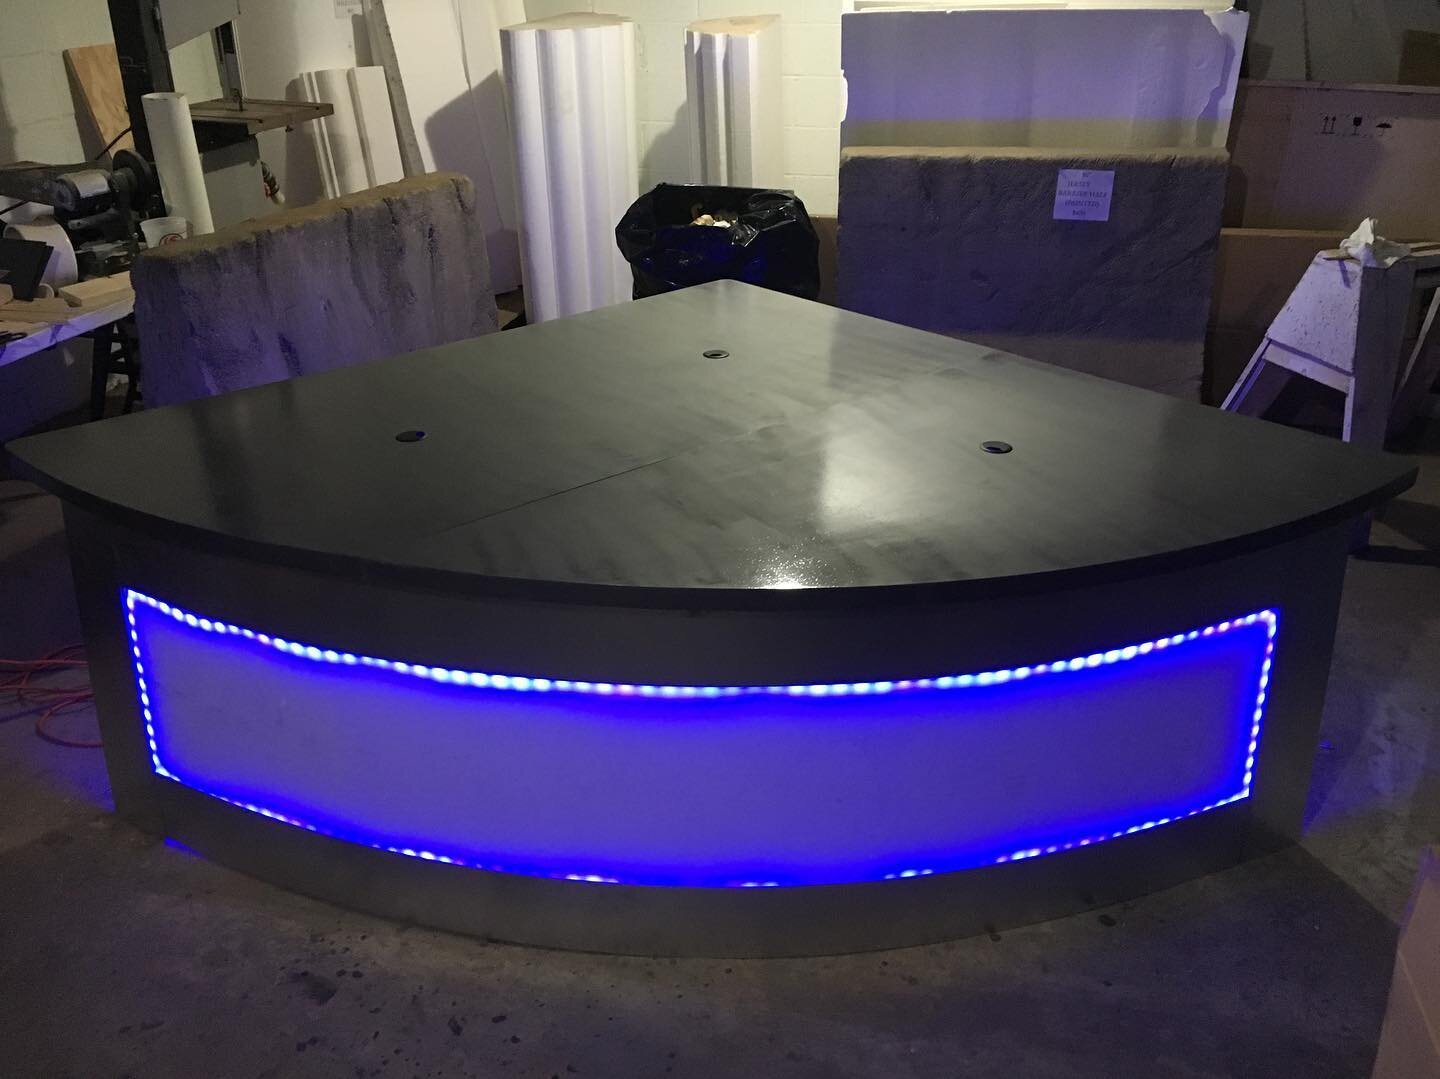 Earlier this month we had the opportunity to make a custom discussion table for @dialitdownpod podcast.
.
.
.
#customfabrication #podcast